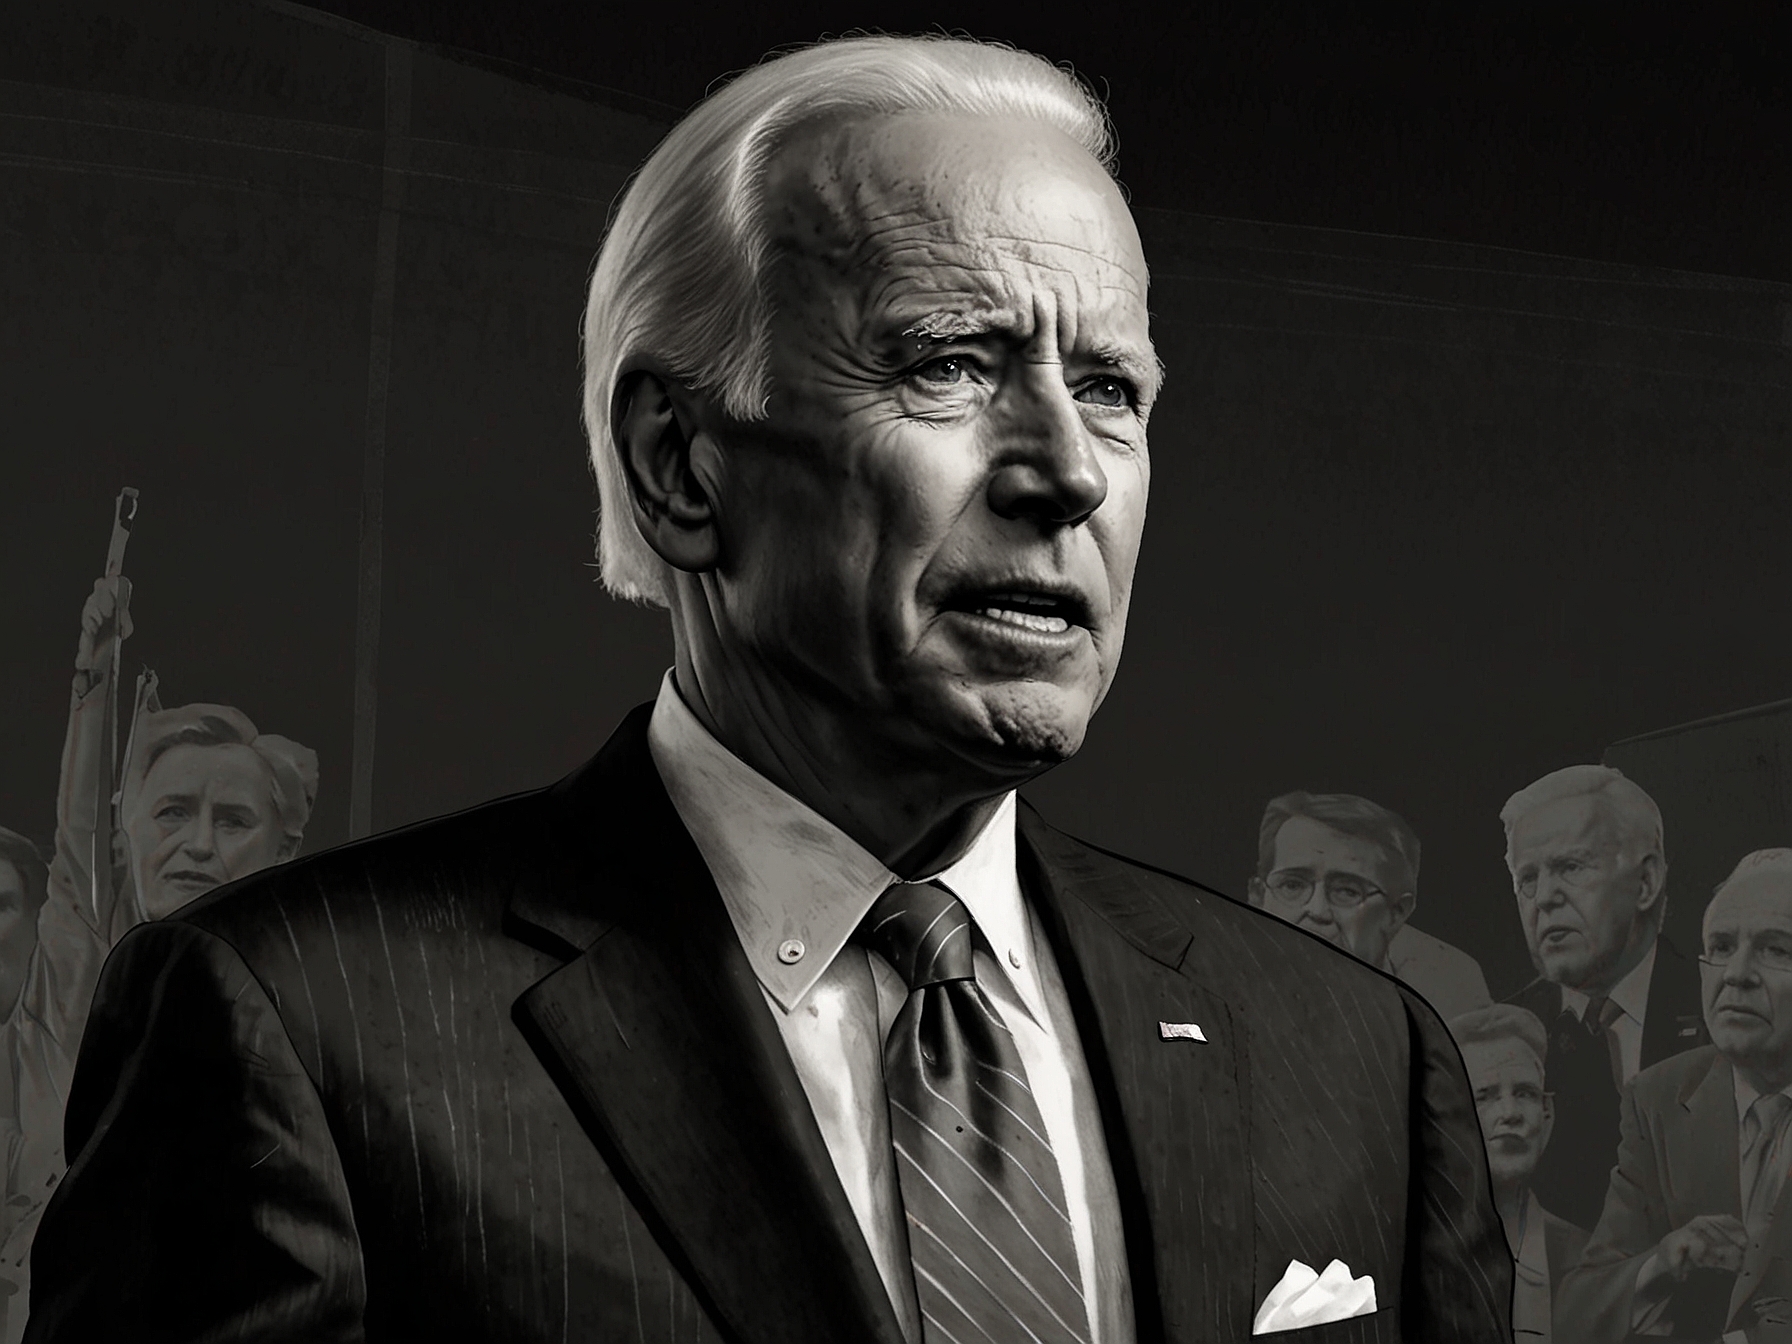 Illustration of President Biden appearing frustrated during the debate, with disjointed responses and defensive body language, capturing the lackluster performance mentioned.